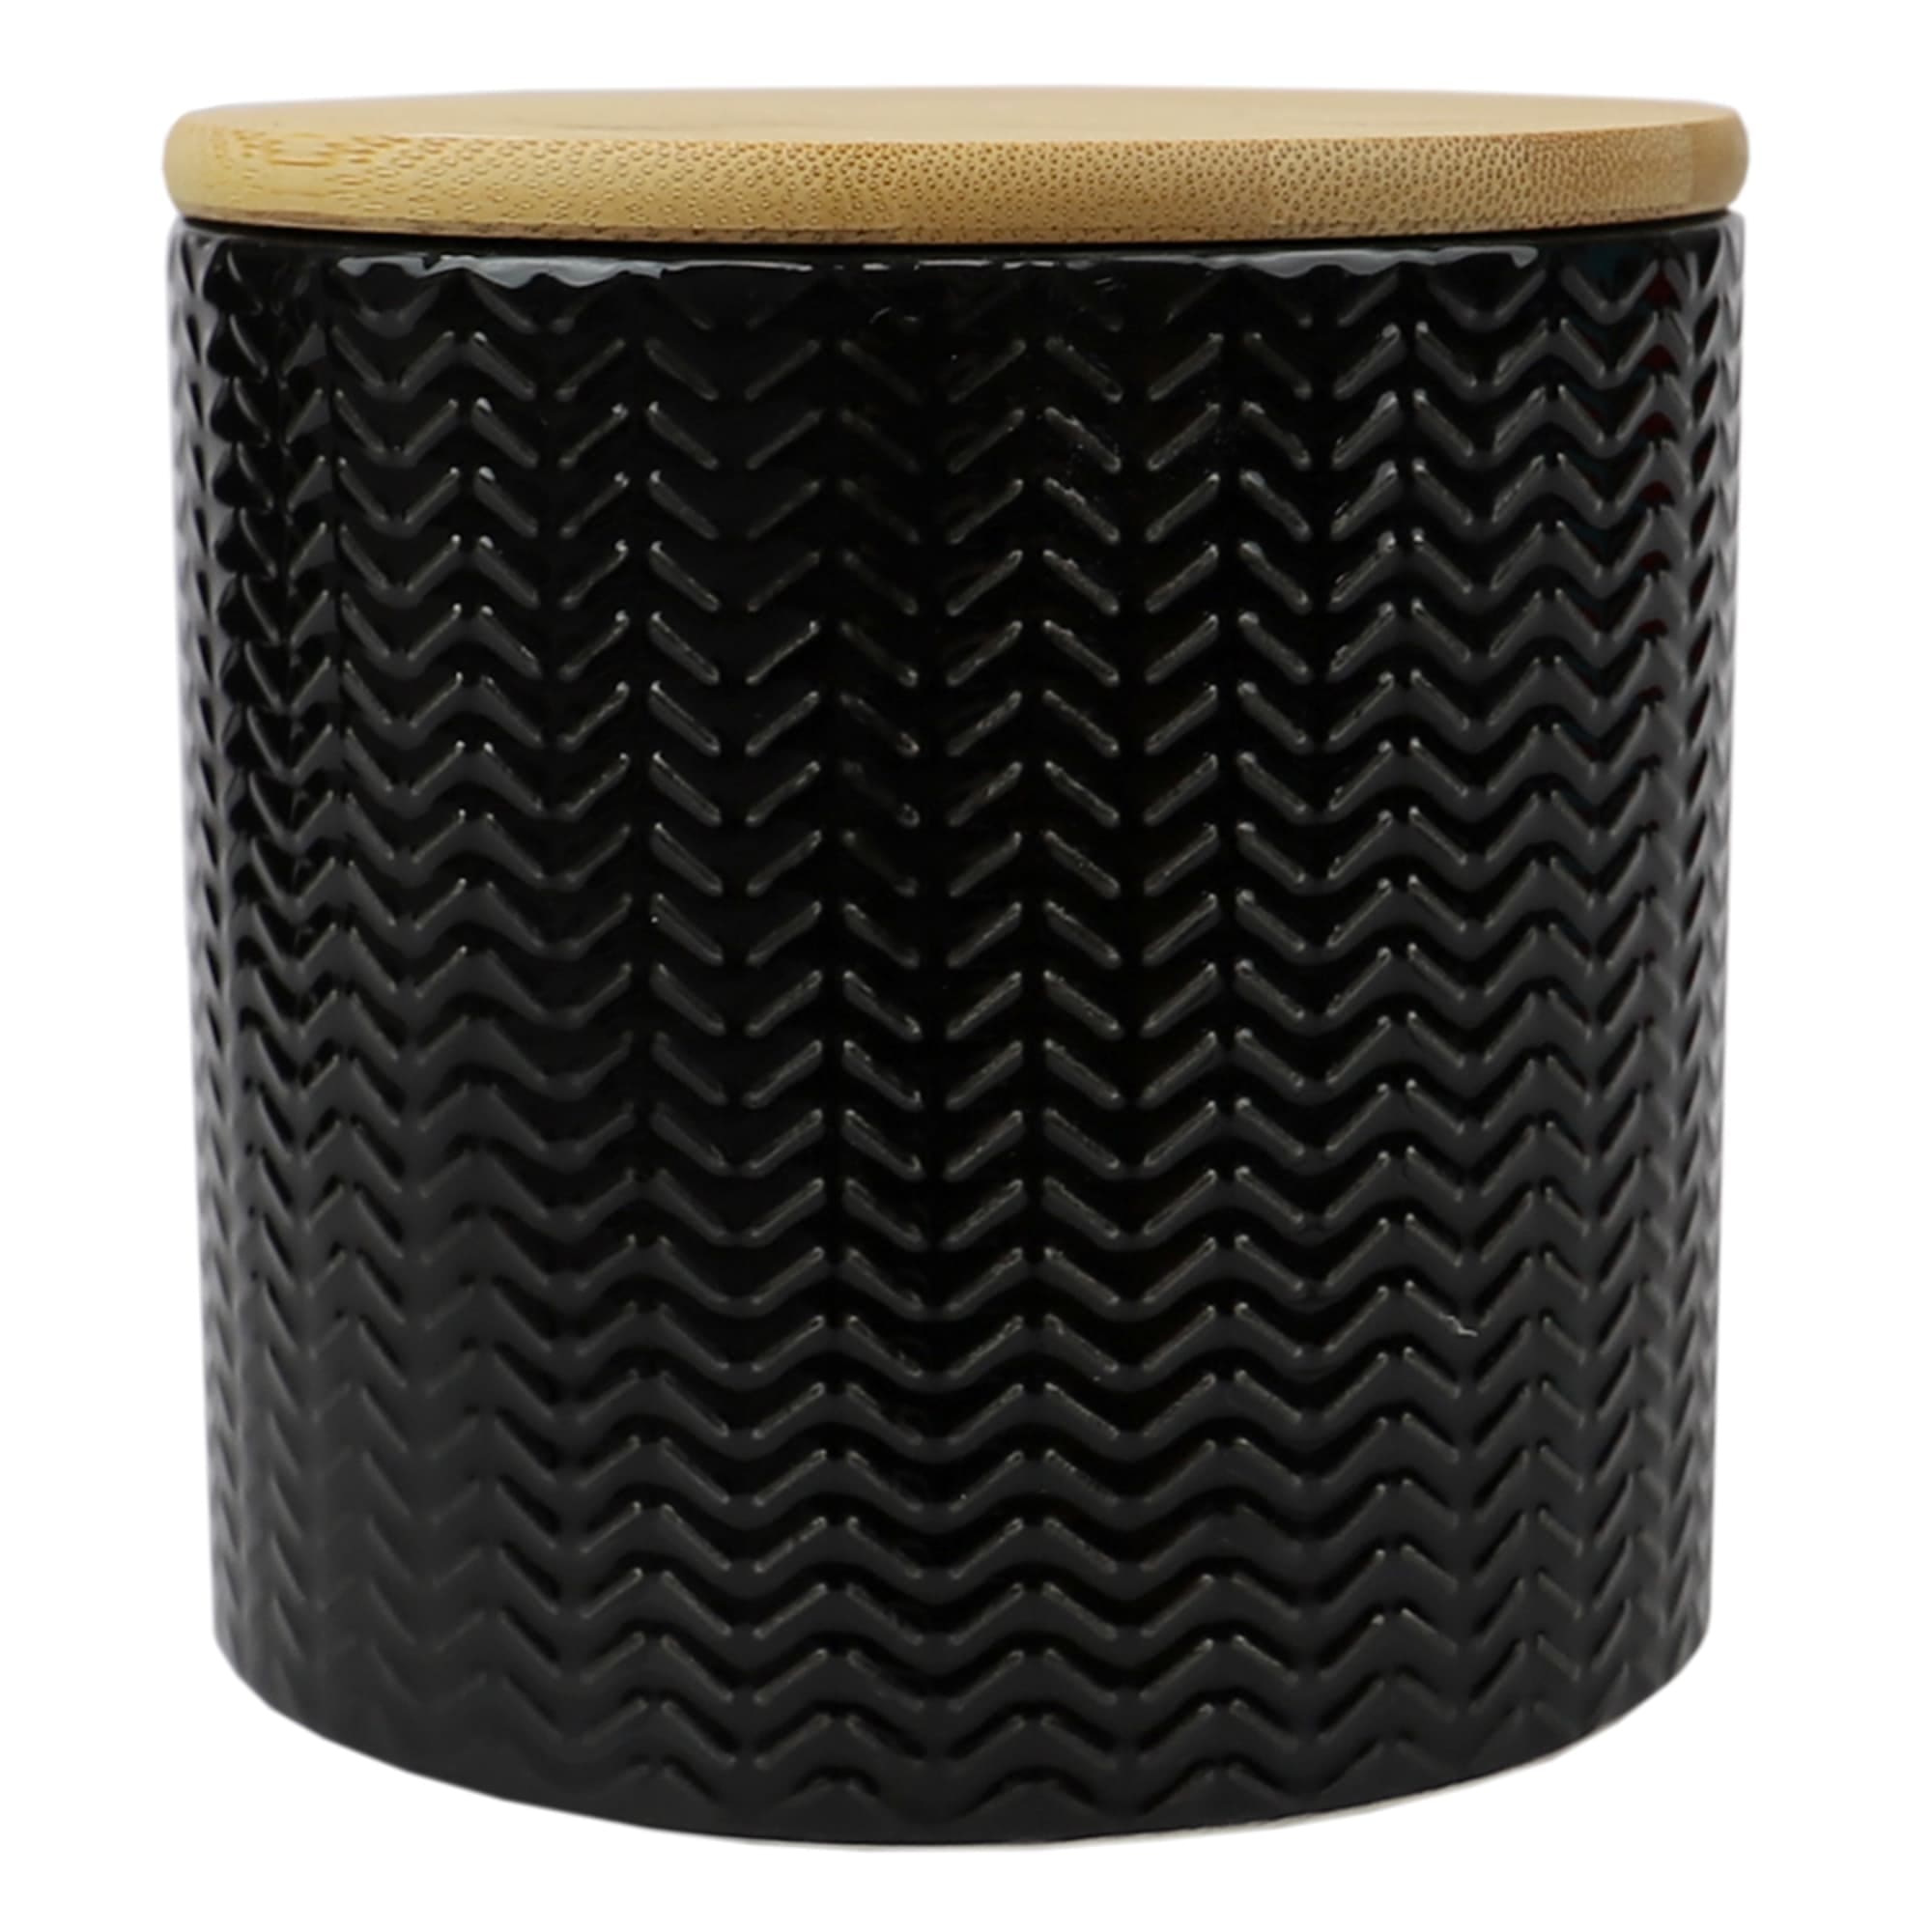 Home Basics Wave Small Ceramic Canister, Black $5.00 EACH, CASE PACK OF 12